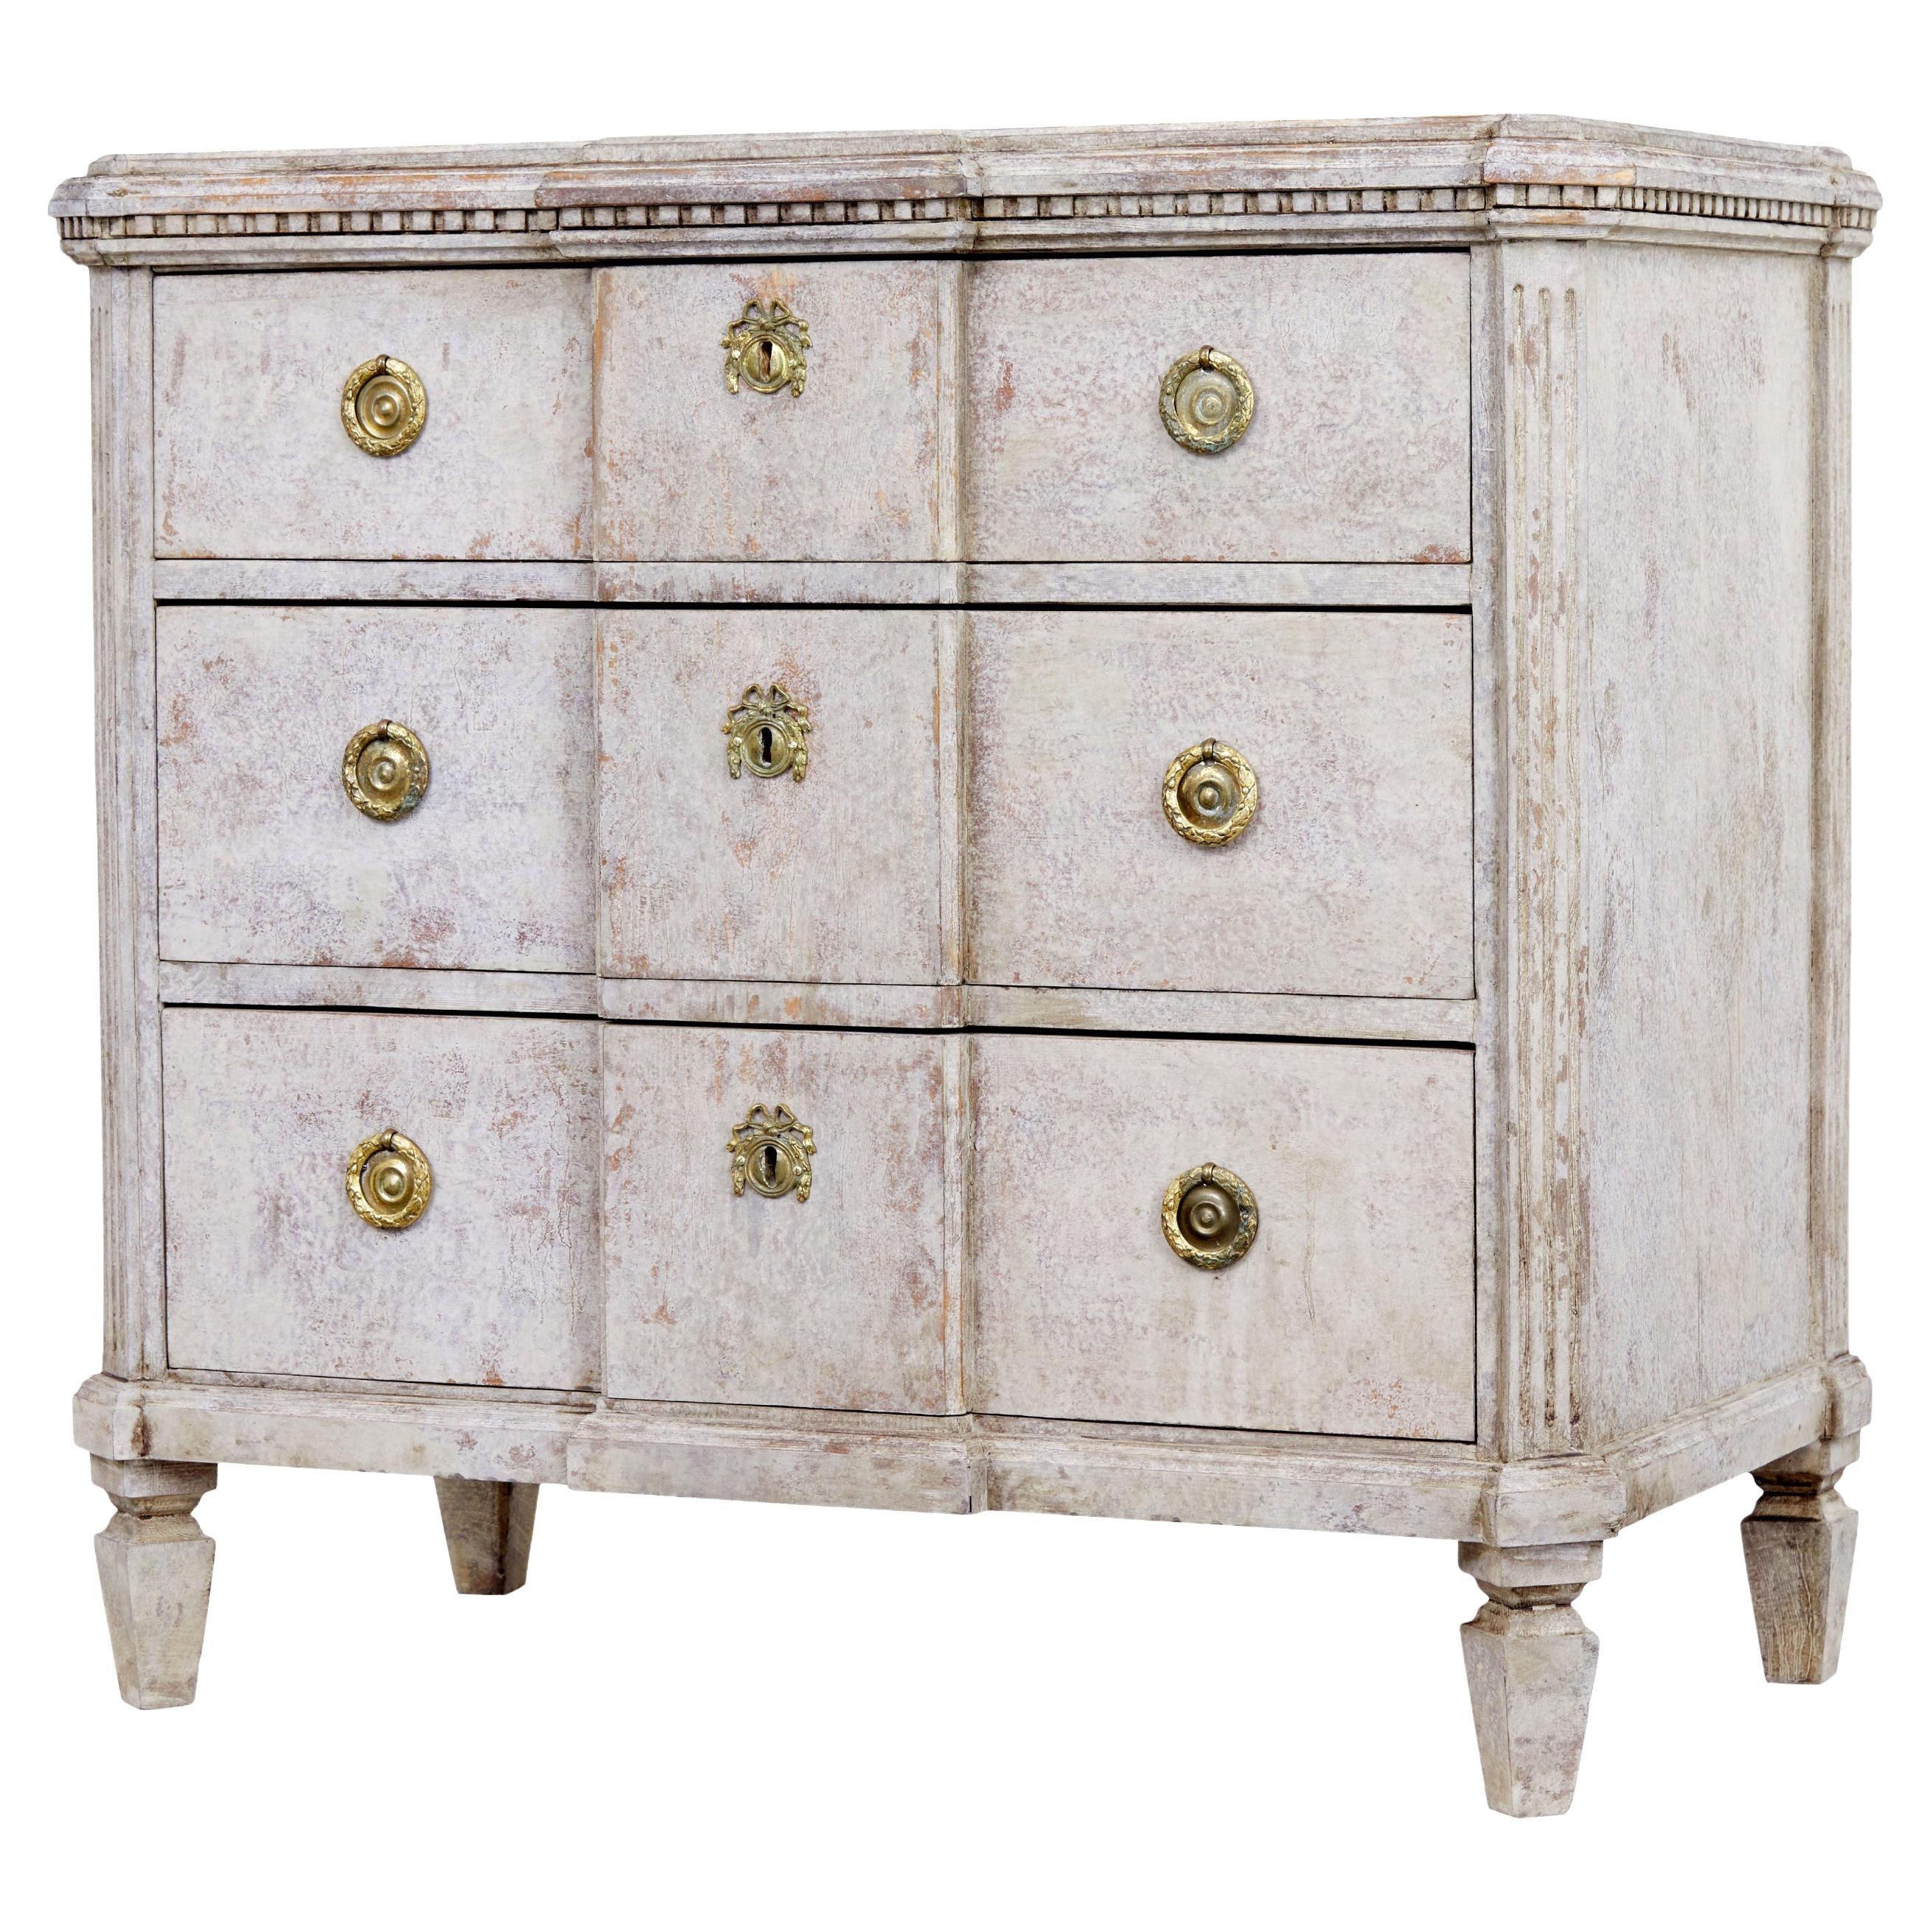 Swedish 19th Century Painted Breakfront Chest of Drawers